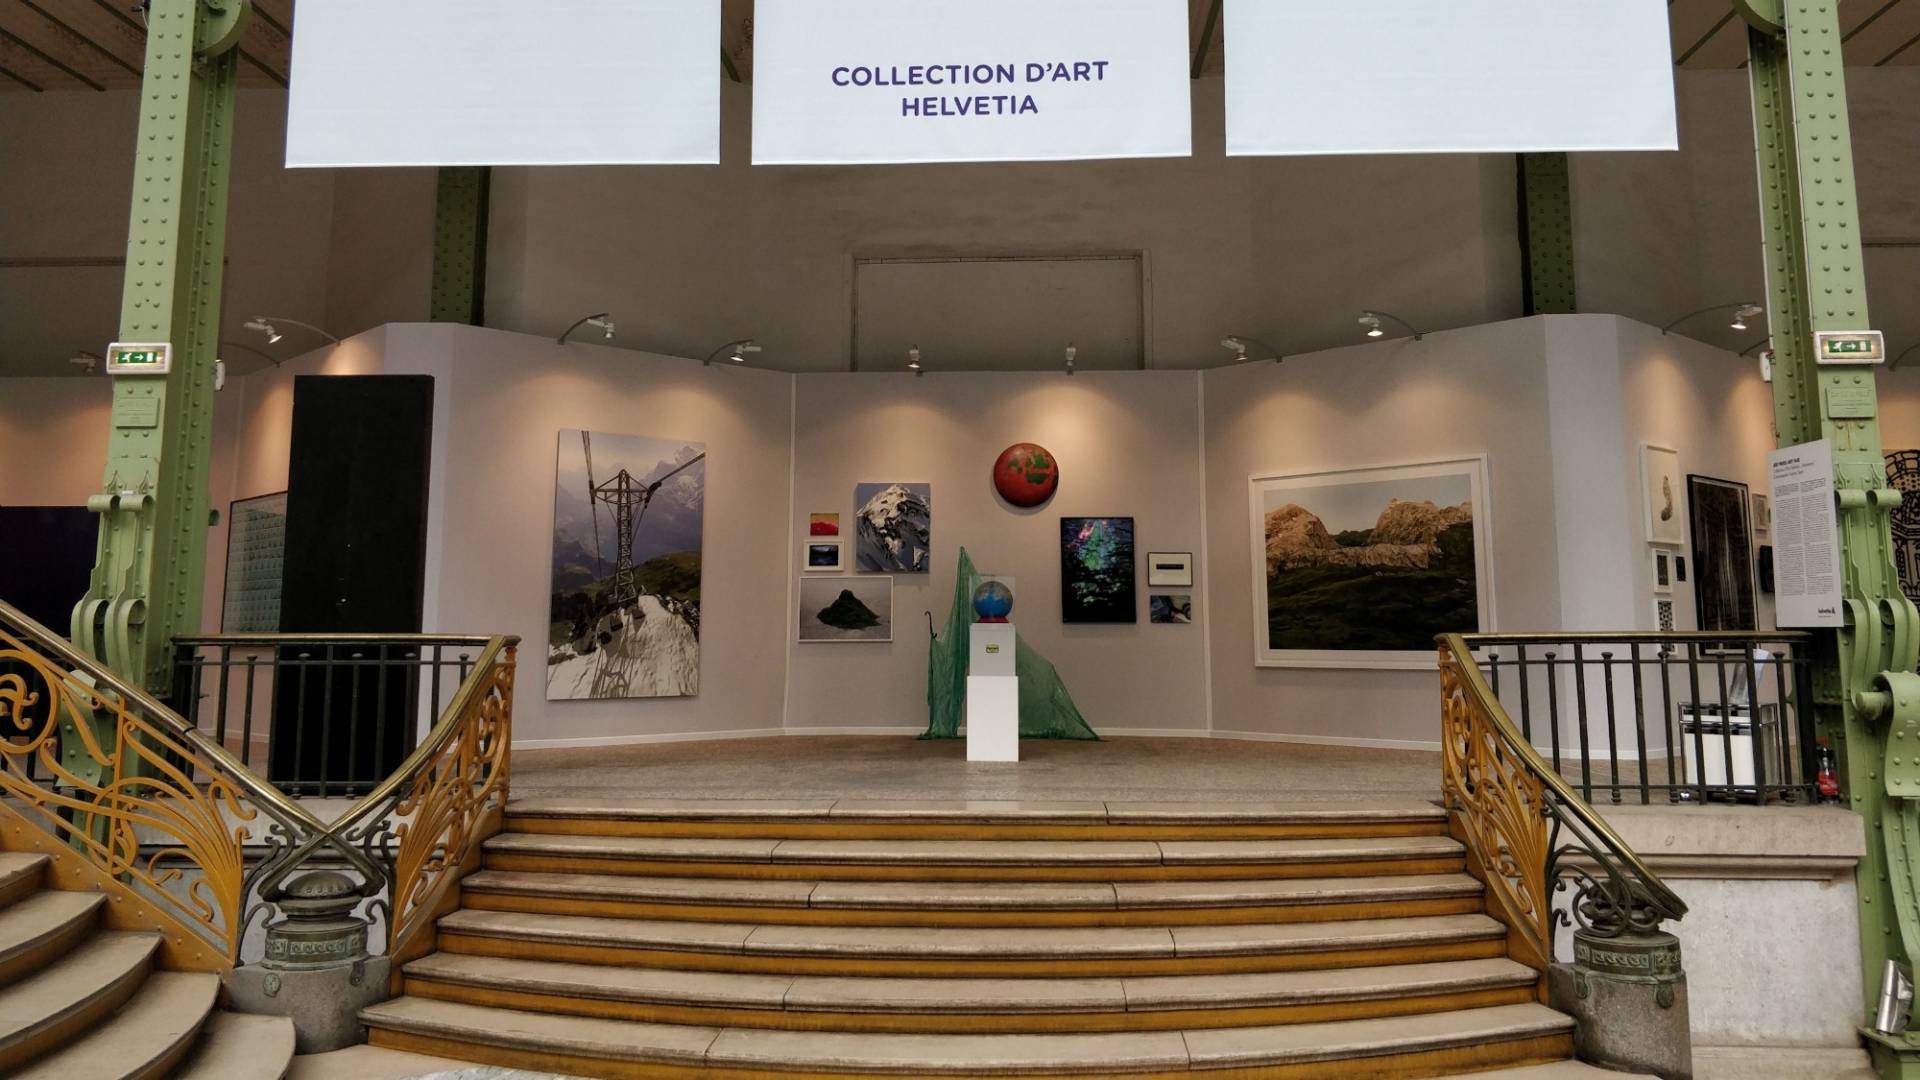 In the picture, you can see a staircase leading to a slightly elevated platform, where the works from the Helvetia Art Collection are being exhibited.